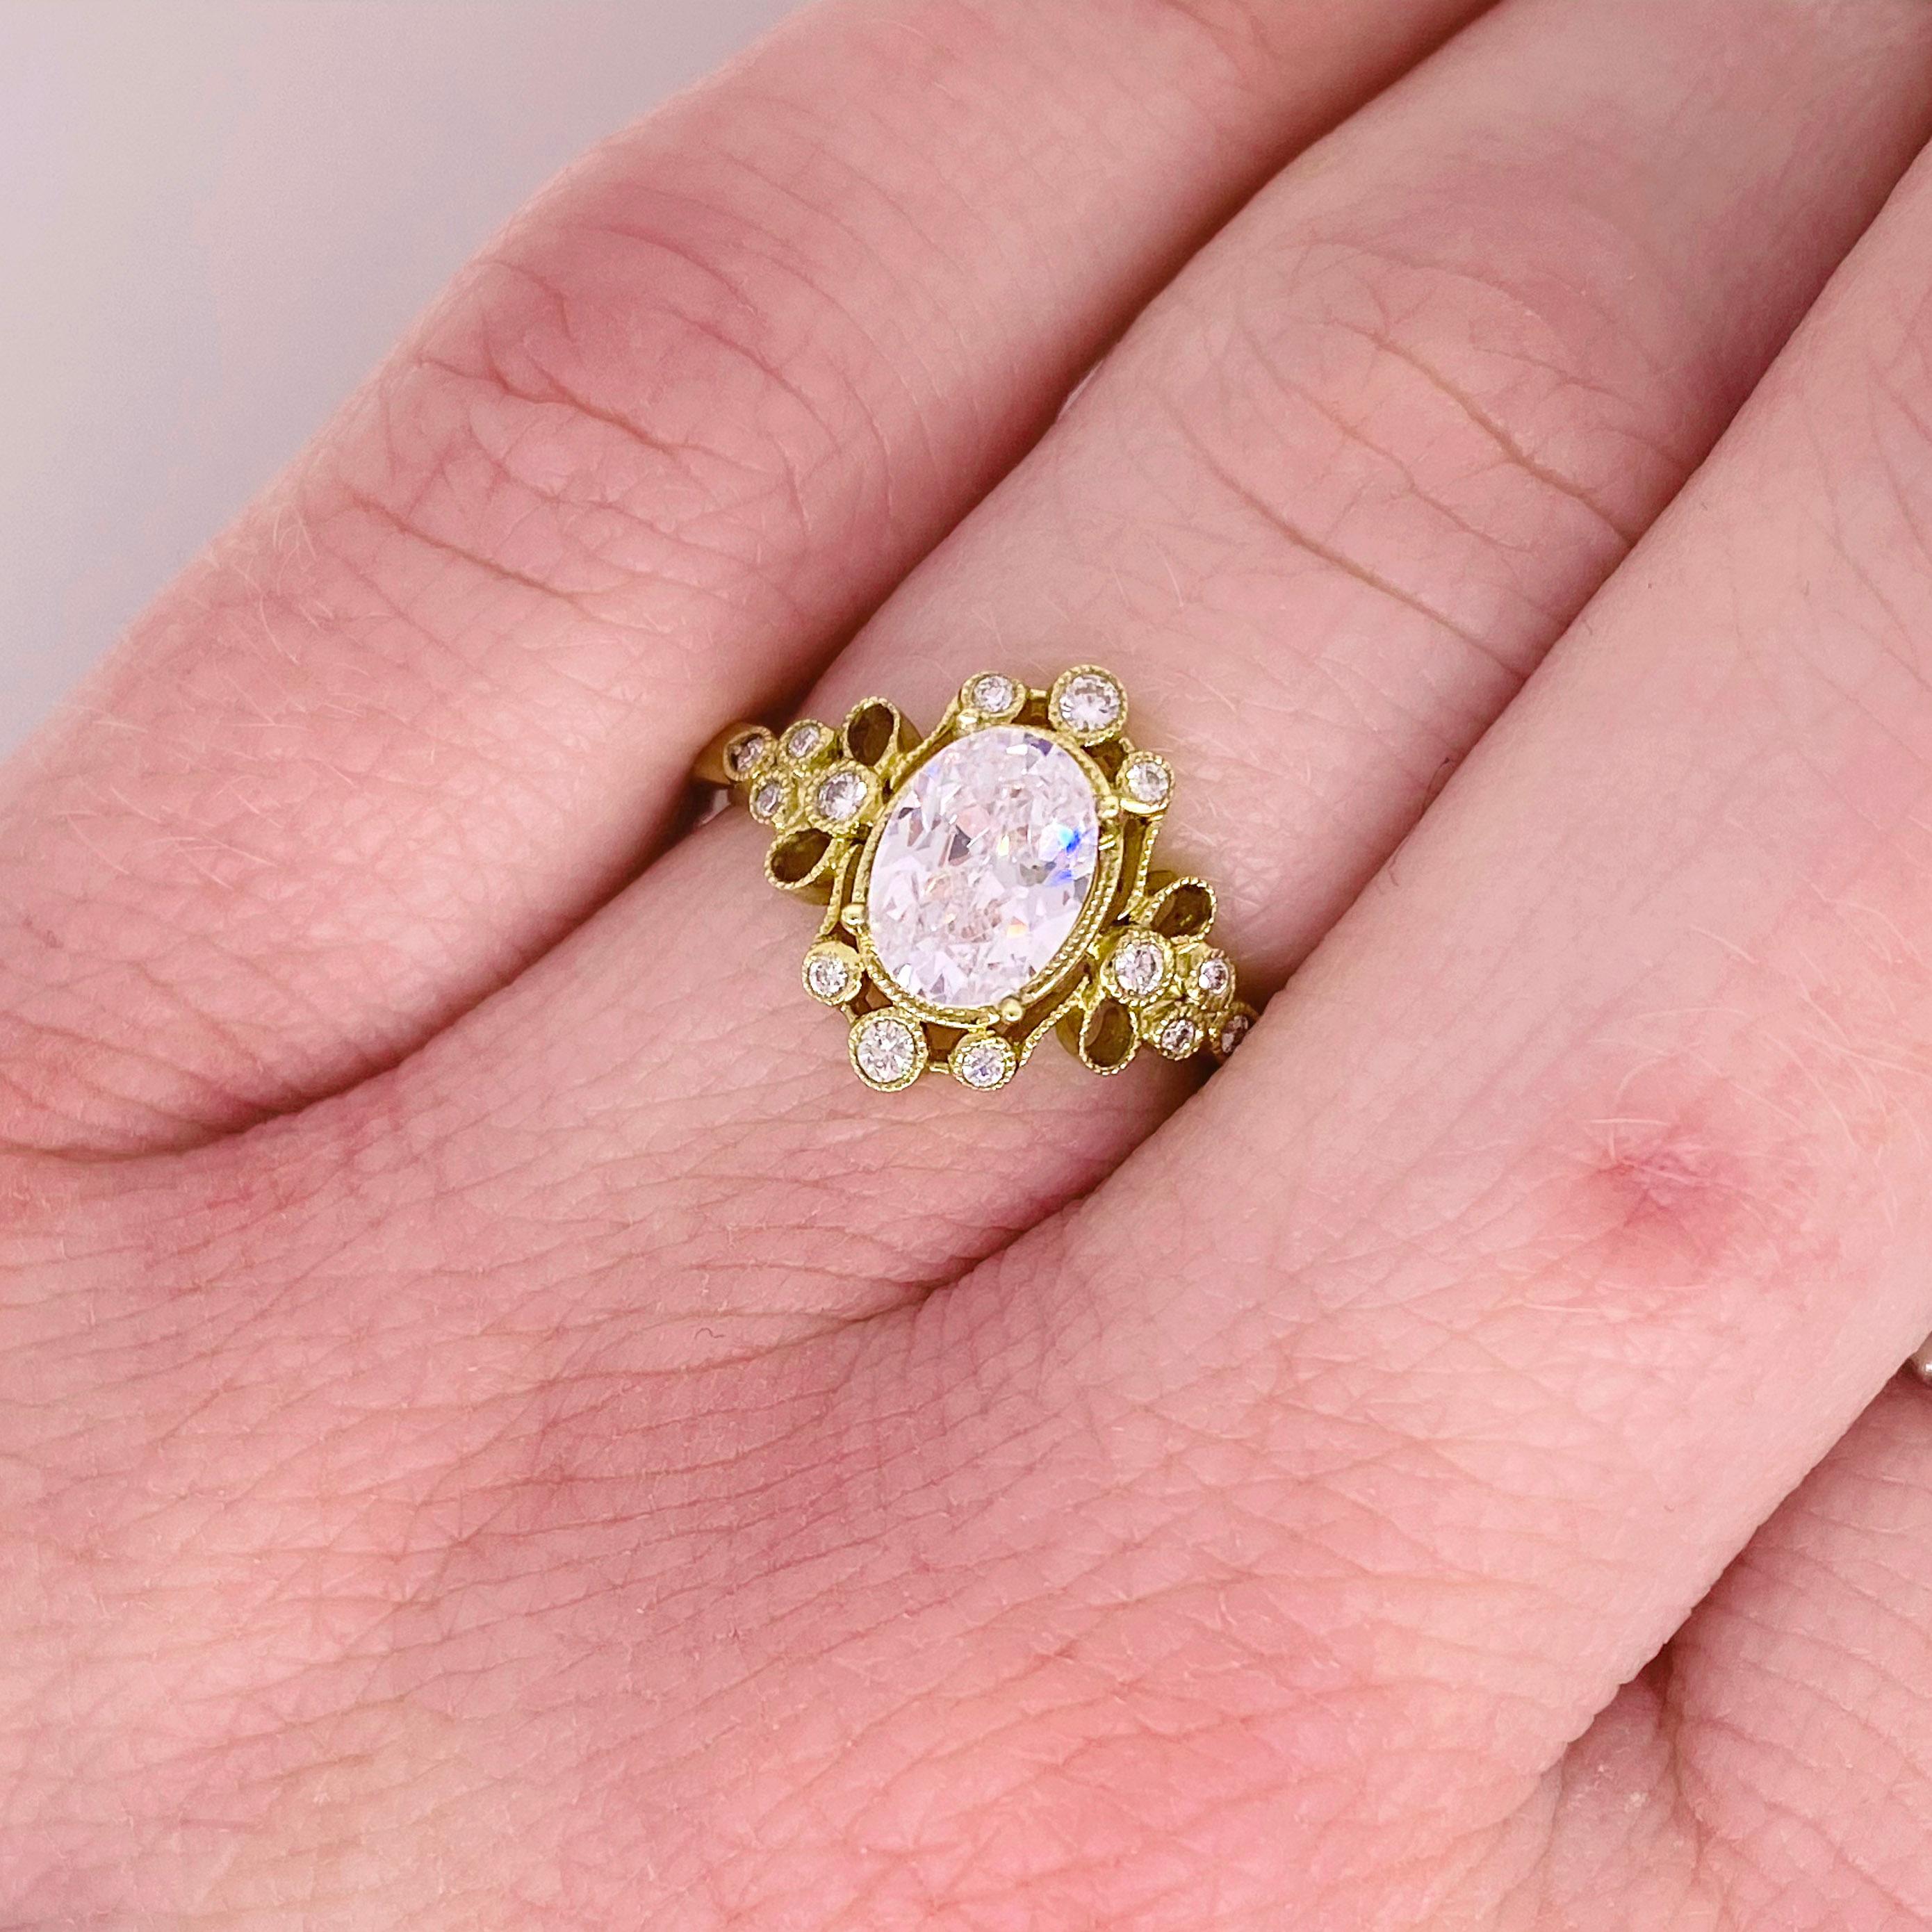 This original vintage inspired diamond ring is so gorgeous!  The milgrain detail is réminiscent of the Victorian era.
The details for this beautiful ring are listed below:
Metal Quality: 14 Karat Yellow Gold
Diamond Number: 15
Center Diamond Weight: